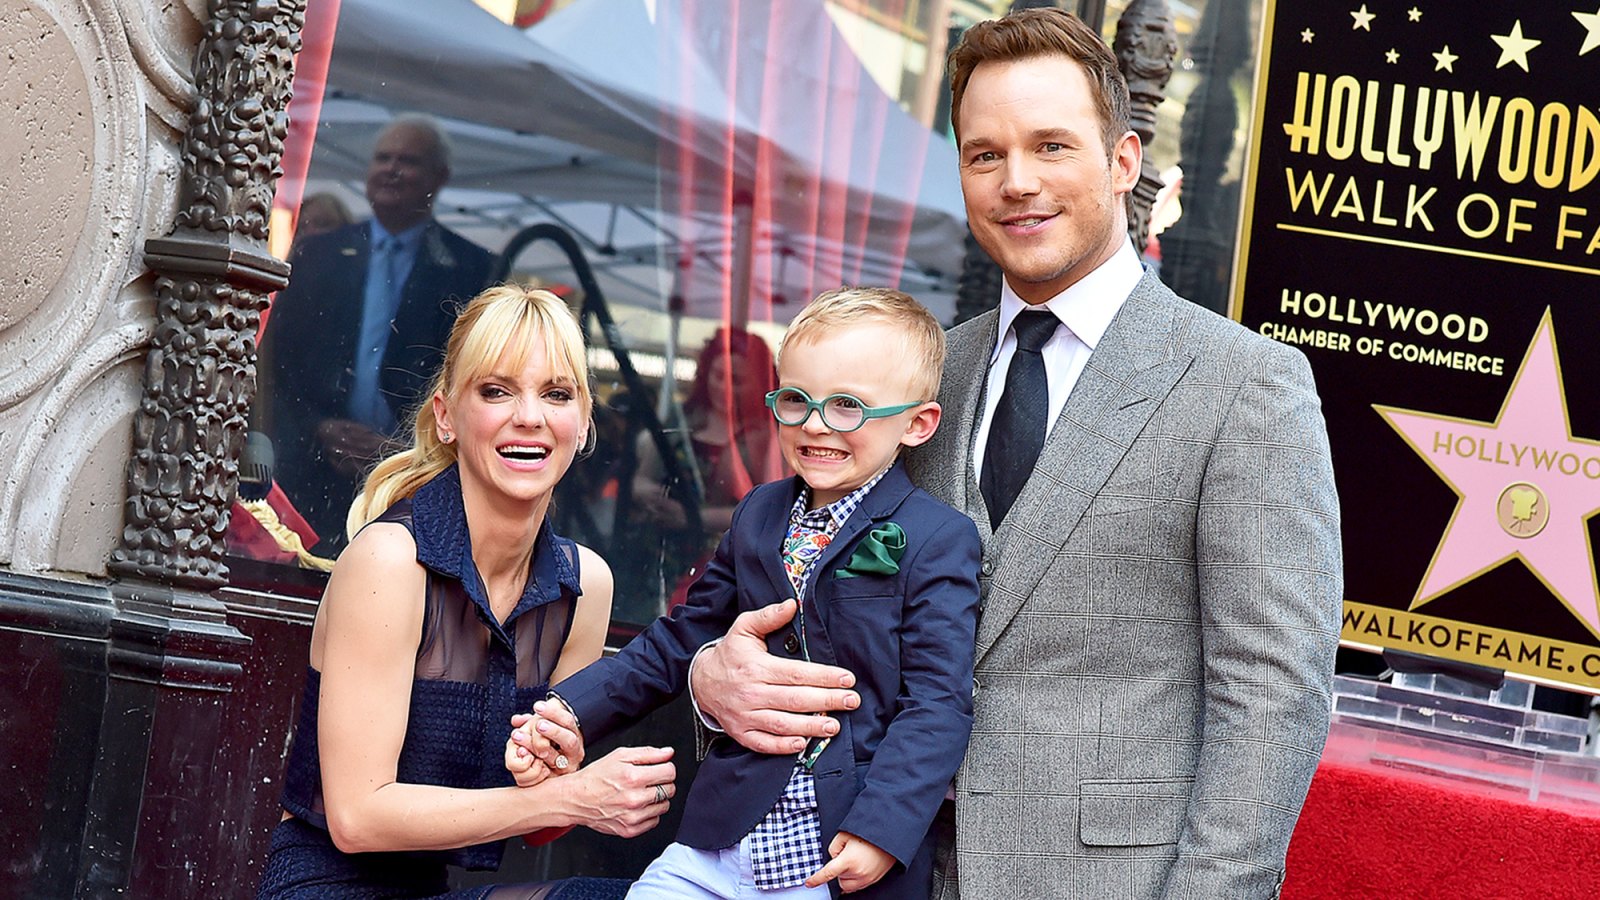 Anna Faris, Chris Pratt and their son Jack attend the ceremony honoring Chris Pratt with a star on the Hollywood Walk of Fame on April 21, 2017 in Hollywood, California.